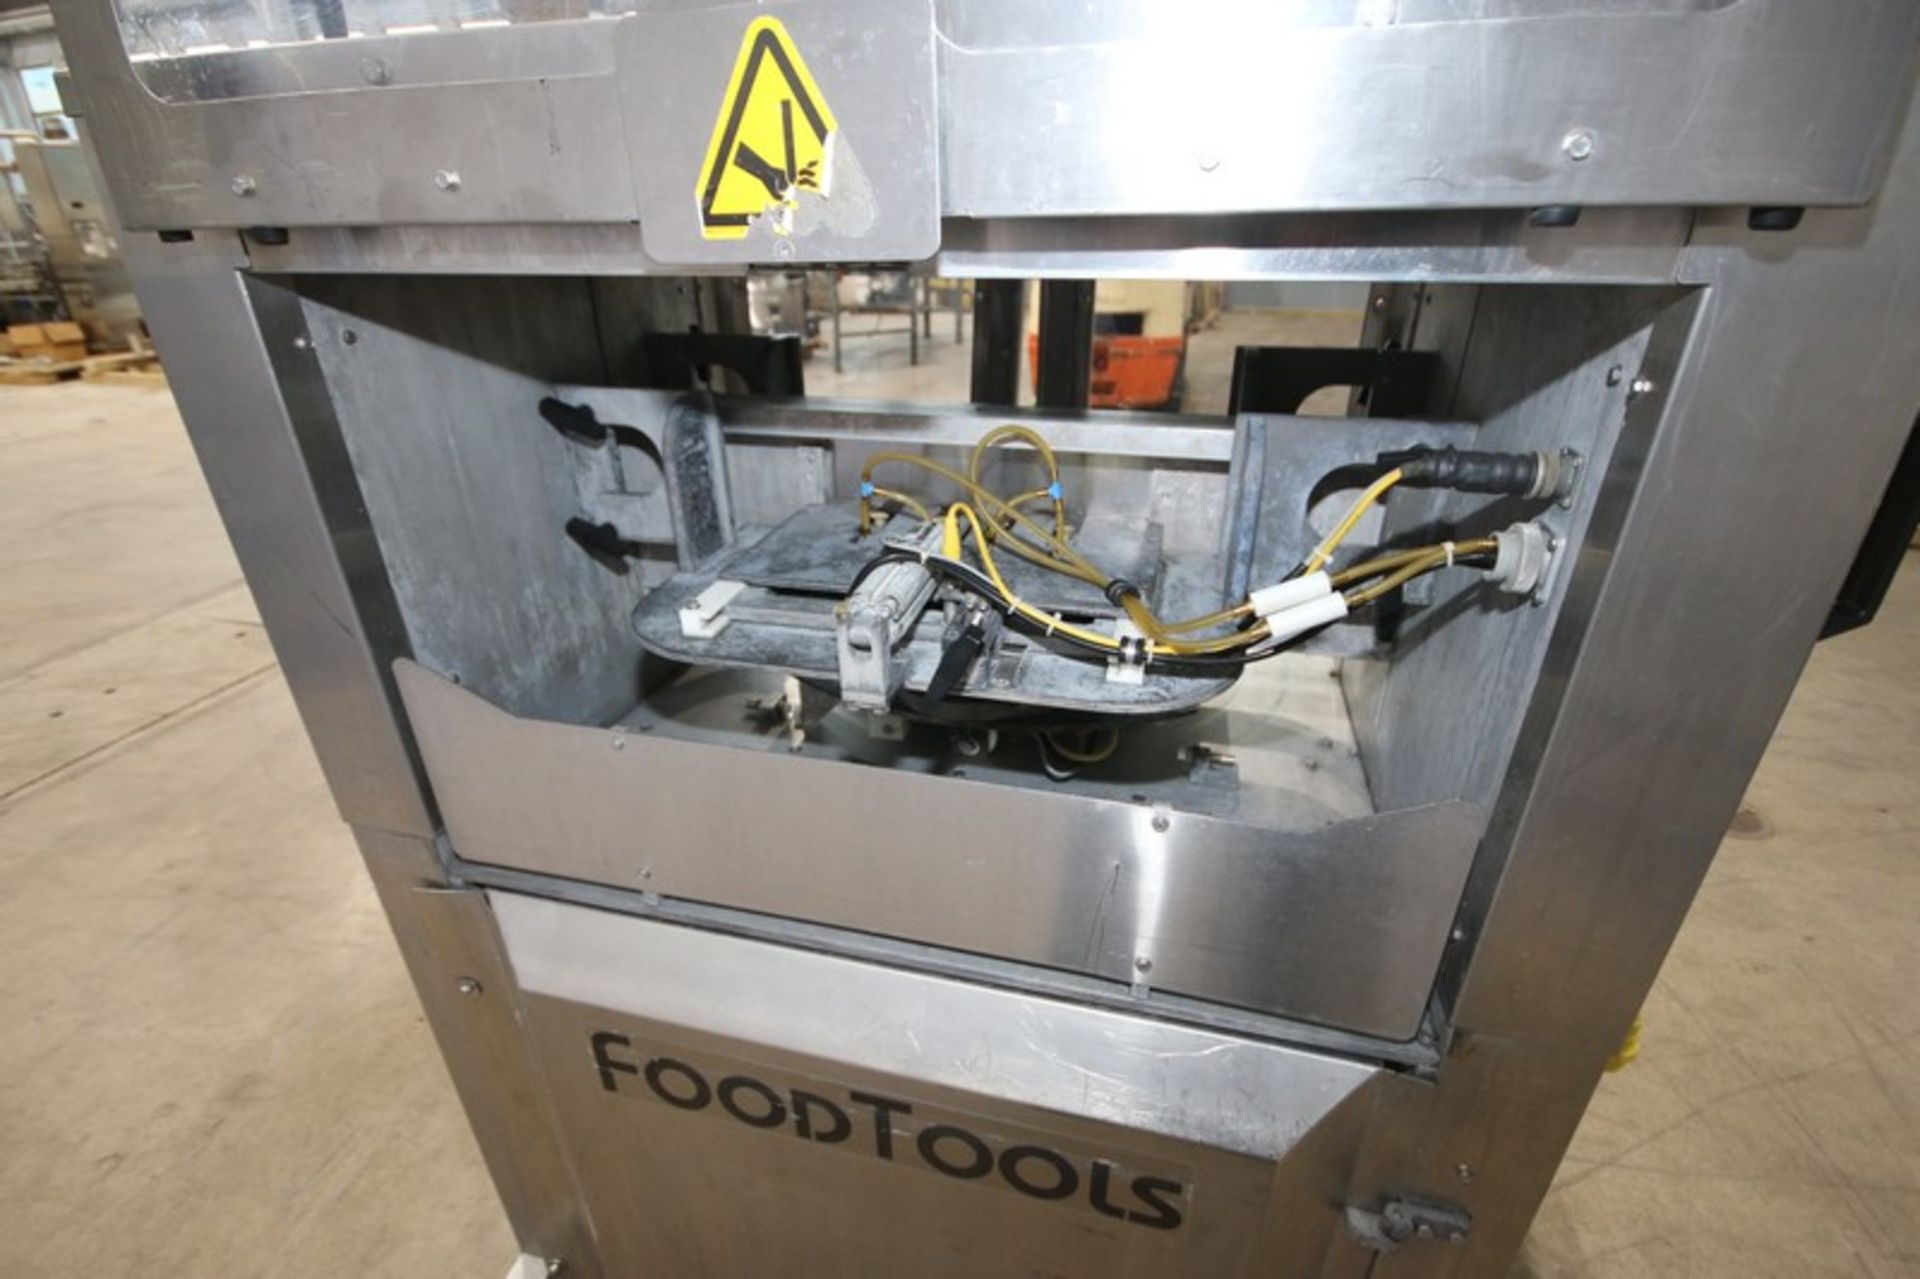 FoodTools S/S Cake Slicer, M/N CS-2000, S/N 3206, 110/220 Volts, Mounted on Portable S/S Frame - Image 5 of 10